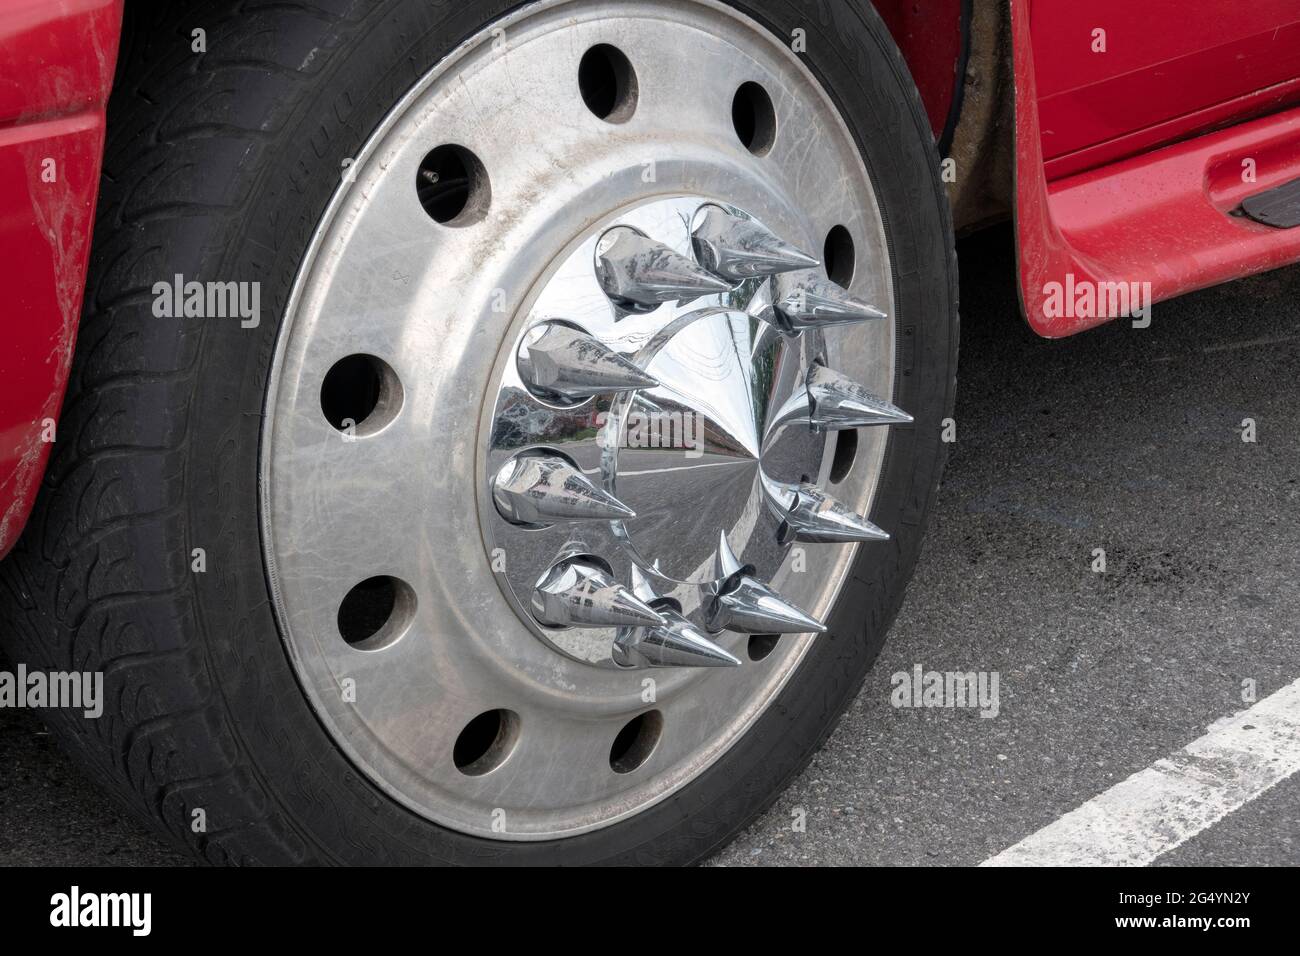 A red Ford truck with chrome spiked axle covers. In Queens, New York. Stock Photo